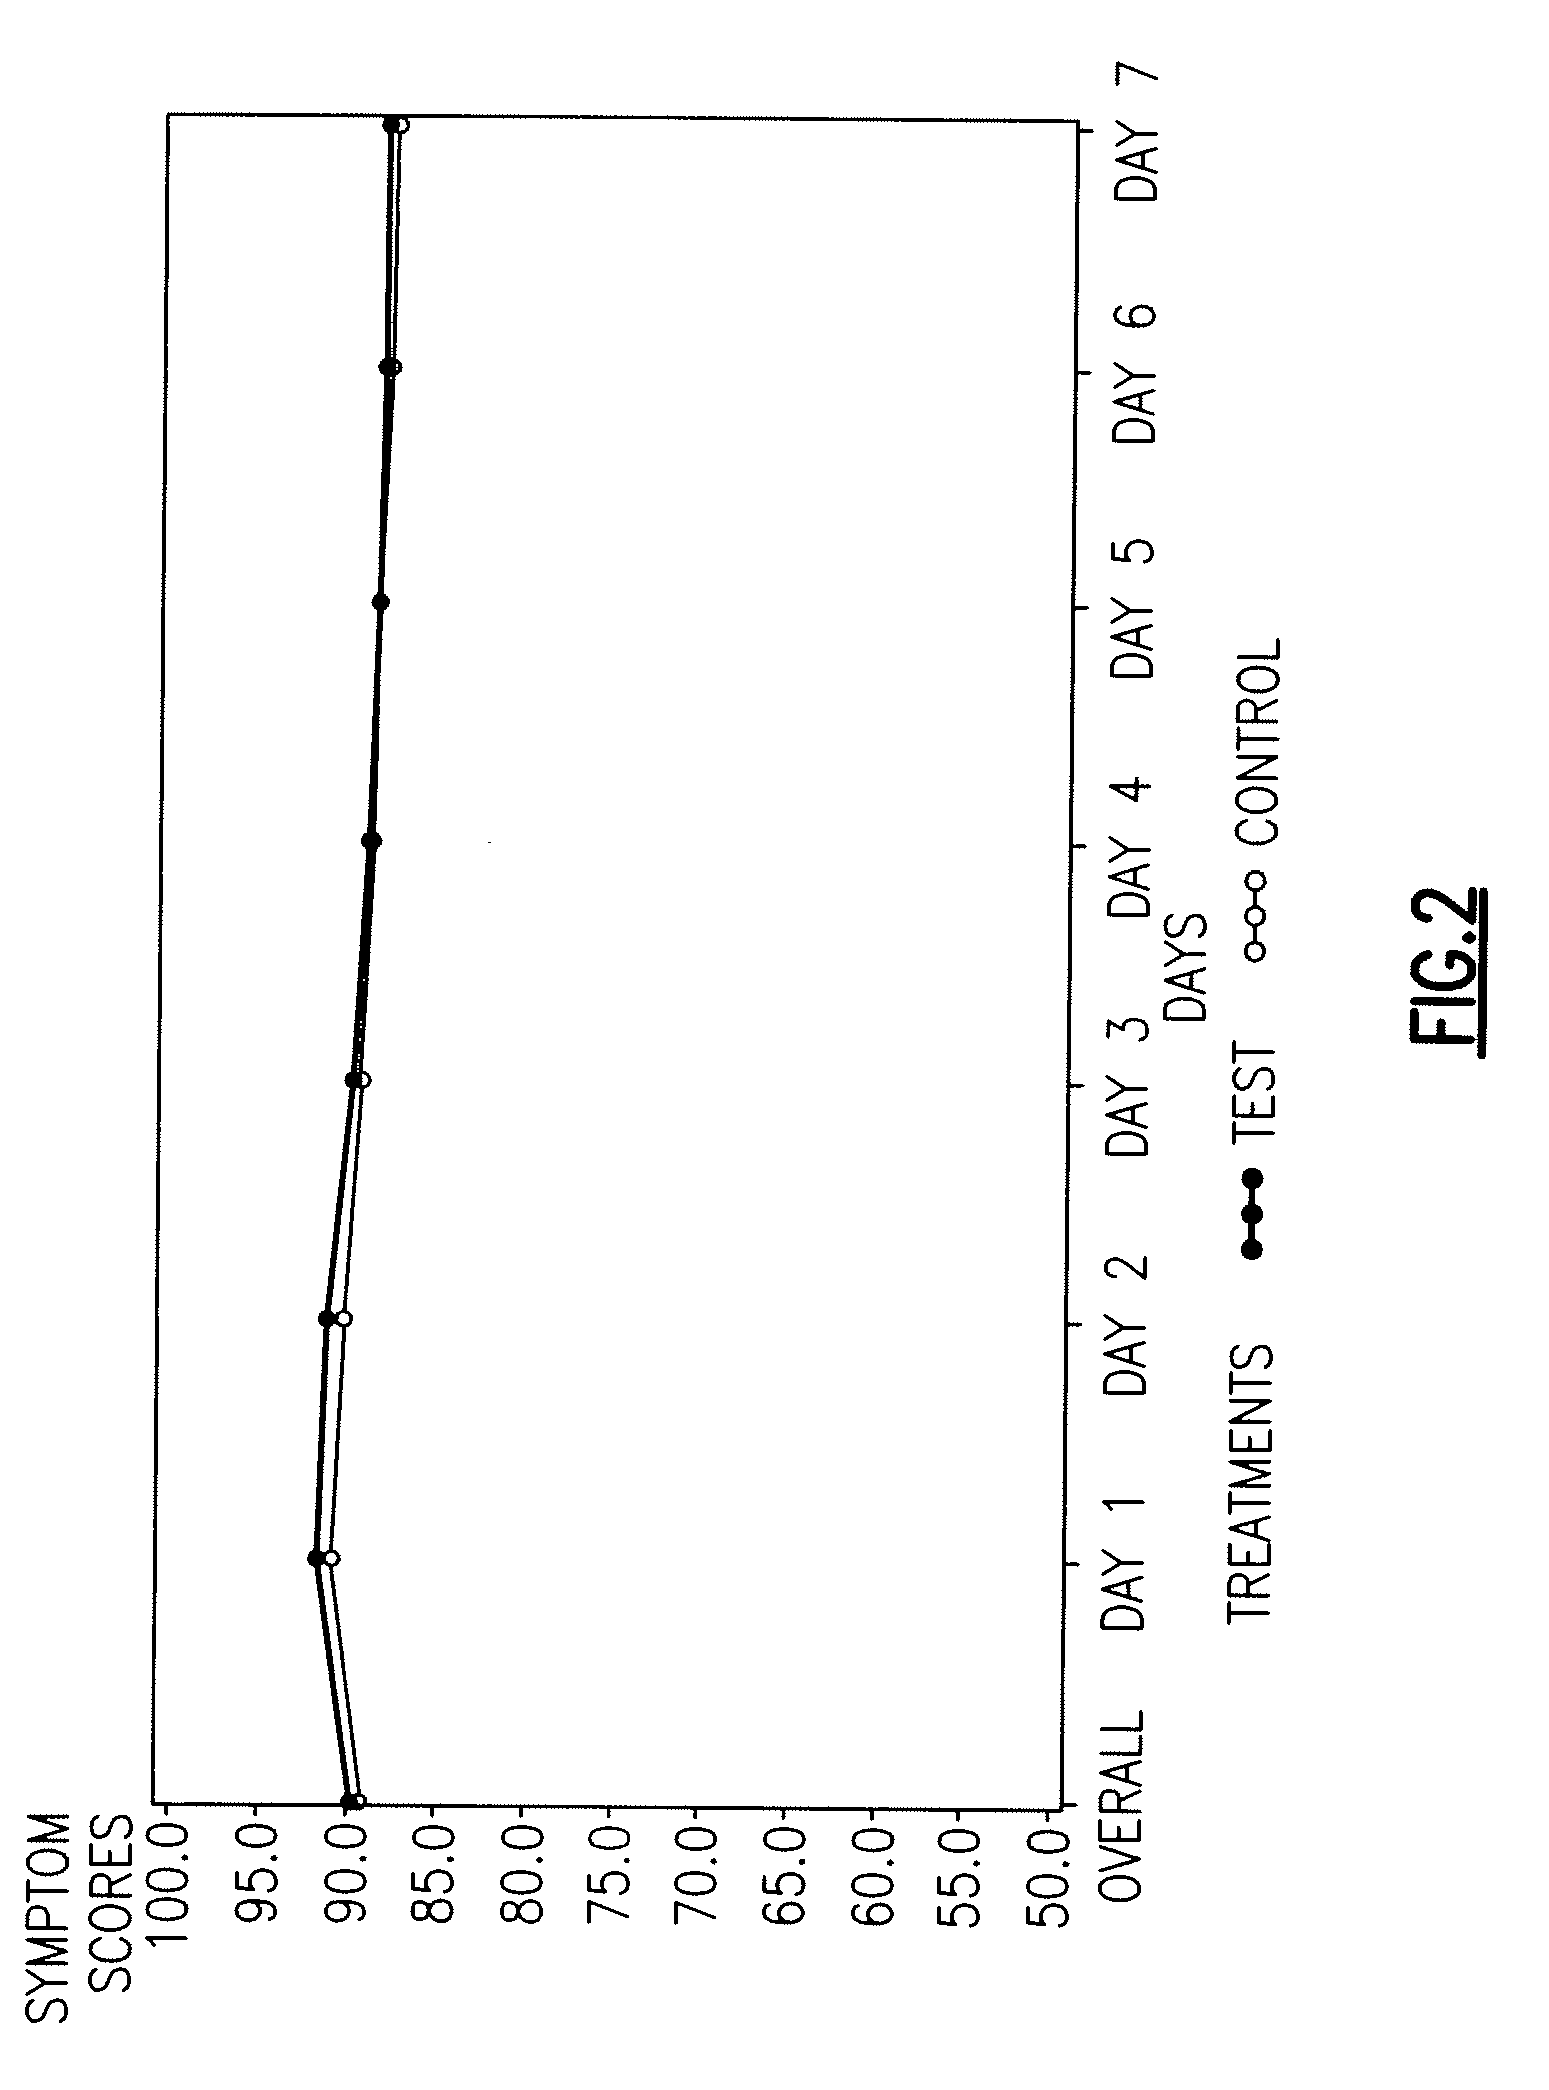 Ophthalmic Compositions with Hyaluronic Acid